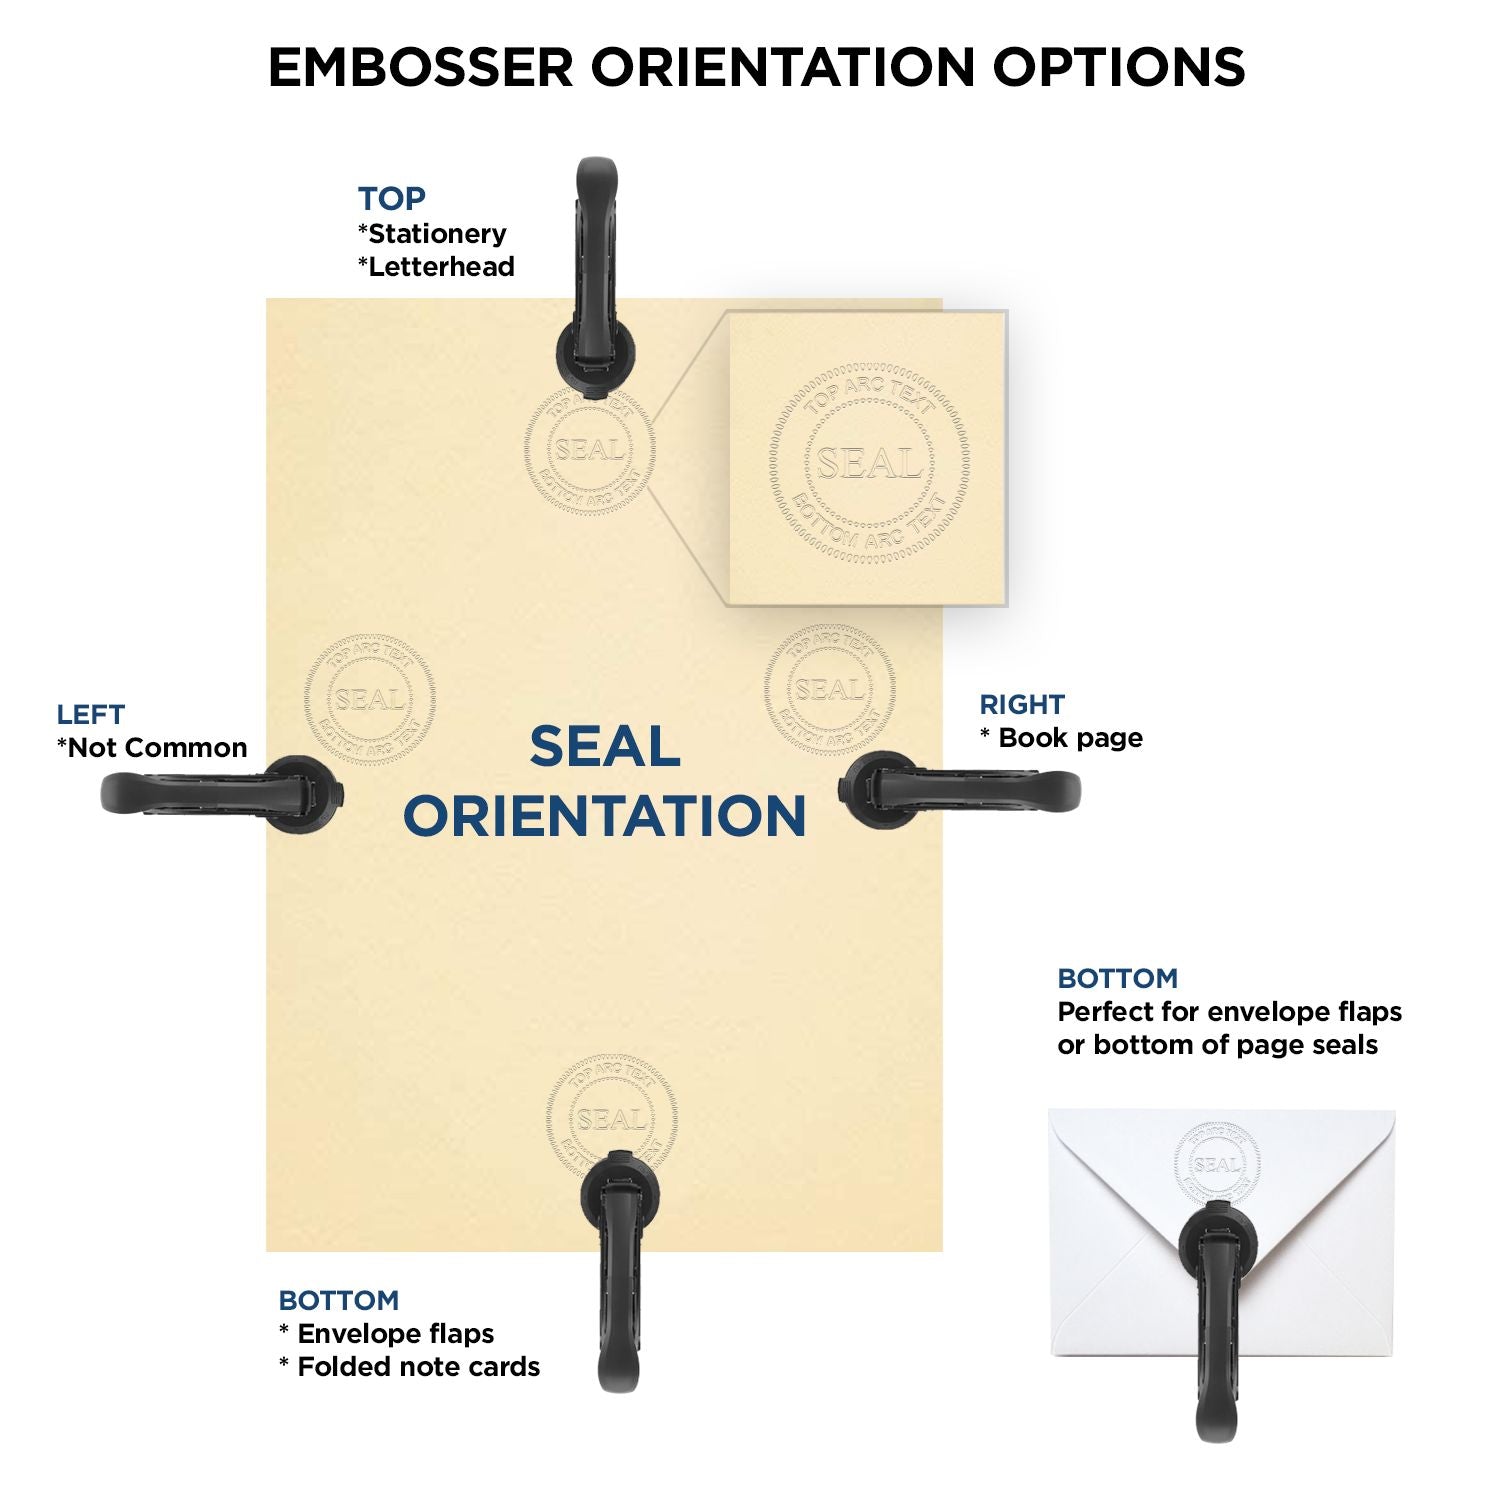 An infographic for the State of Kentucky Extended Long Reach Landscape Architect Seal Embosser showing embosser orientation, this is showing examples of a top, bottom, right and left insert.